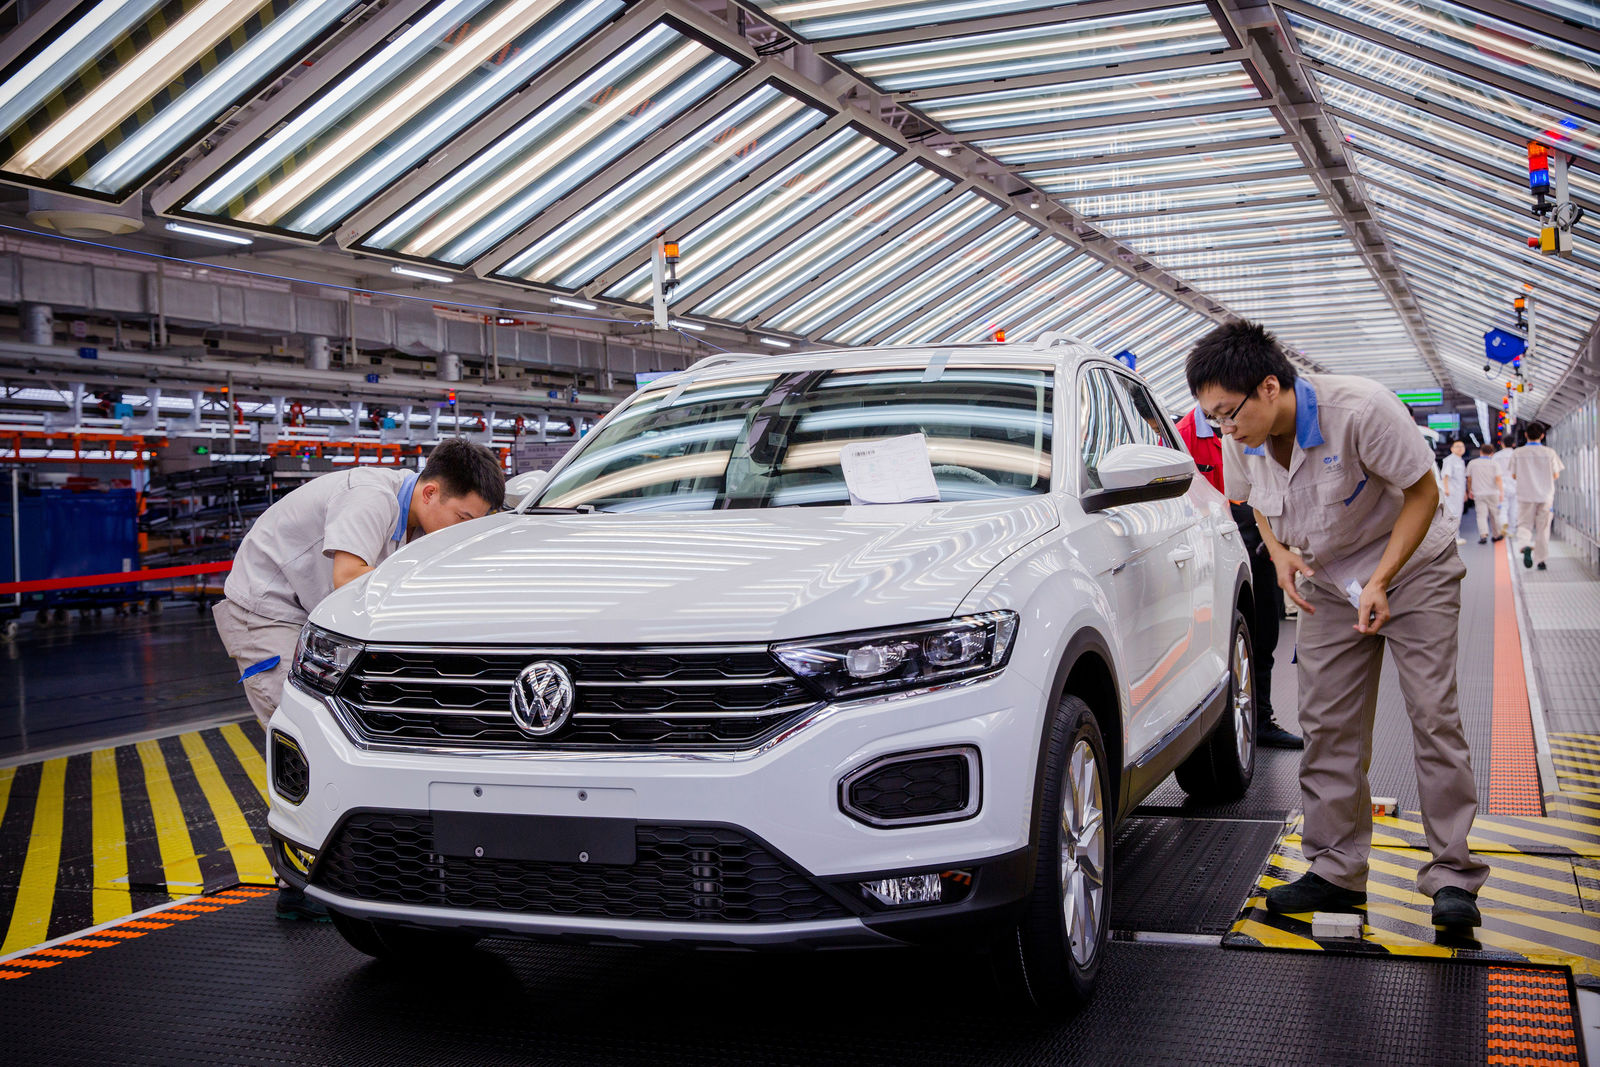 Volkswagen Group China’s mega-factory in Foshan will strengthen e-mobility strategy in China